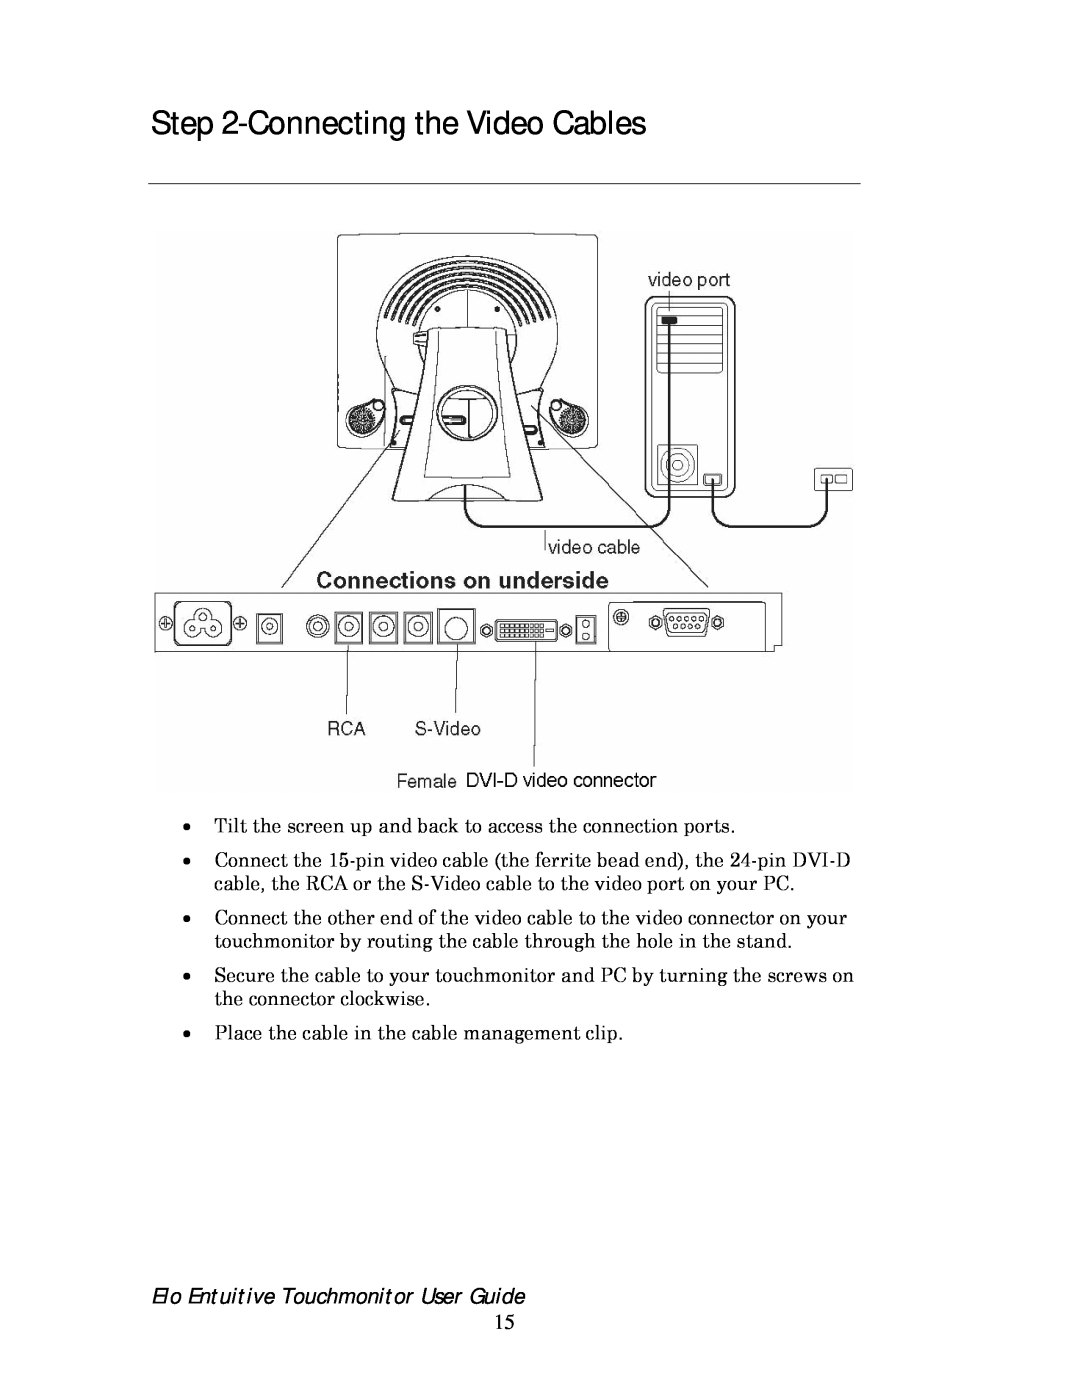 Elo TouchSystems 192XL-XXWA-1 Series manual Connecting the Video Cables, Elo Entuitive Touchmonitor User Guide 